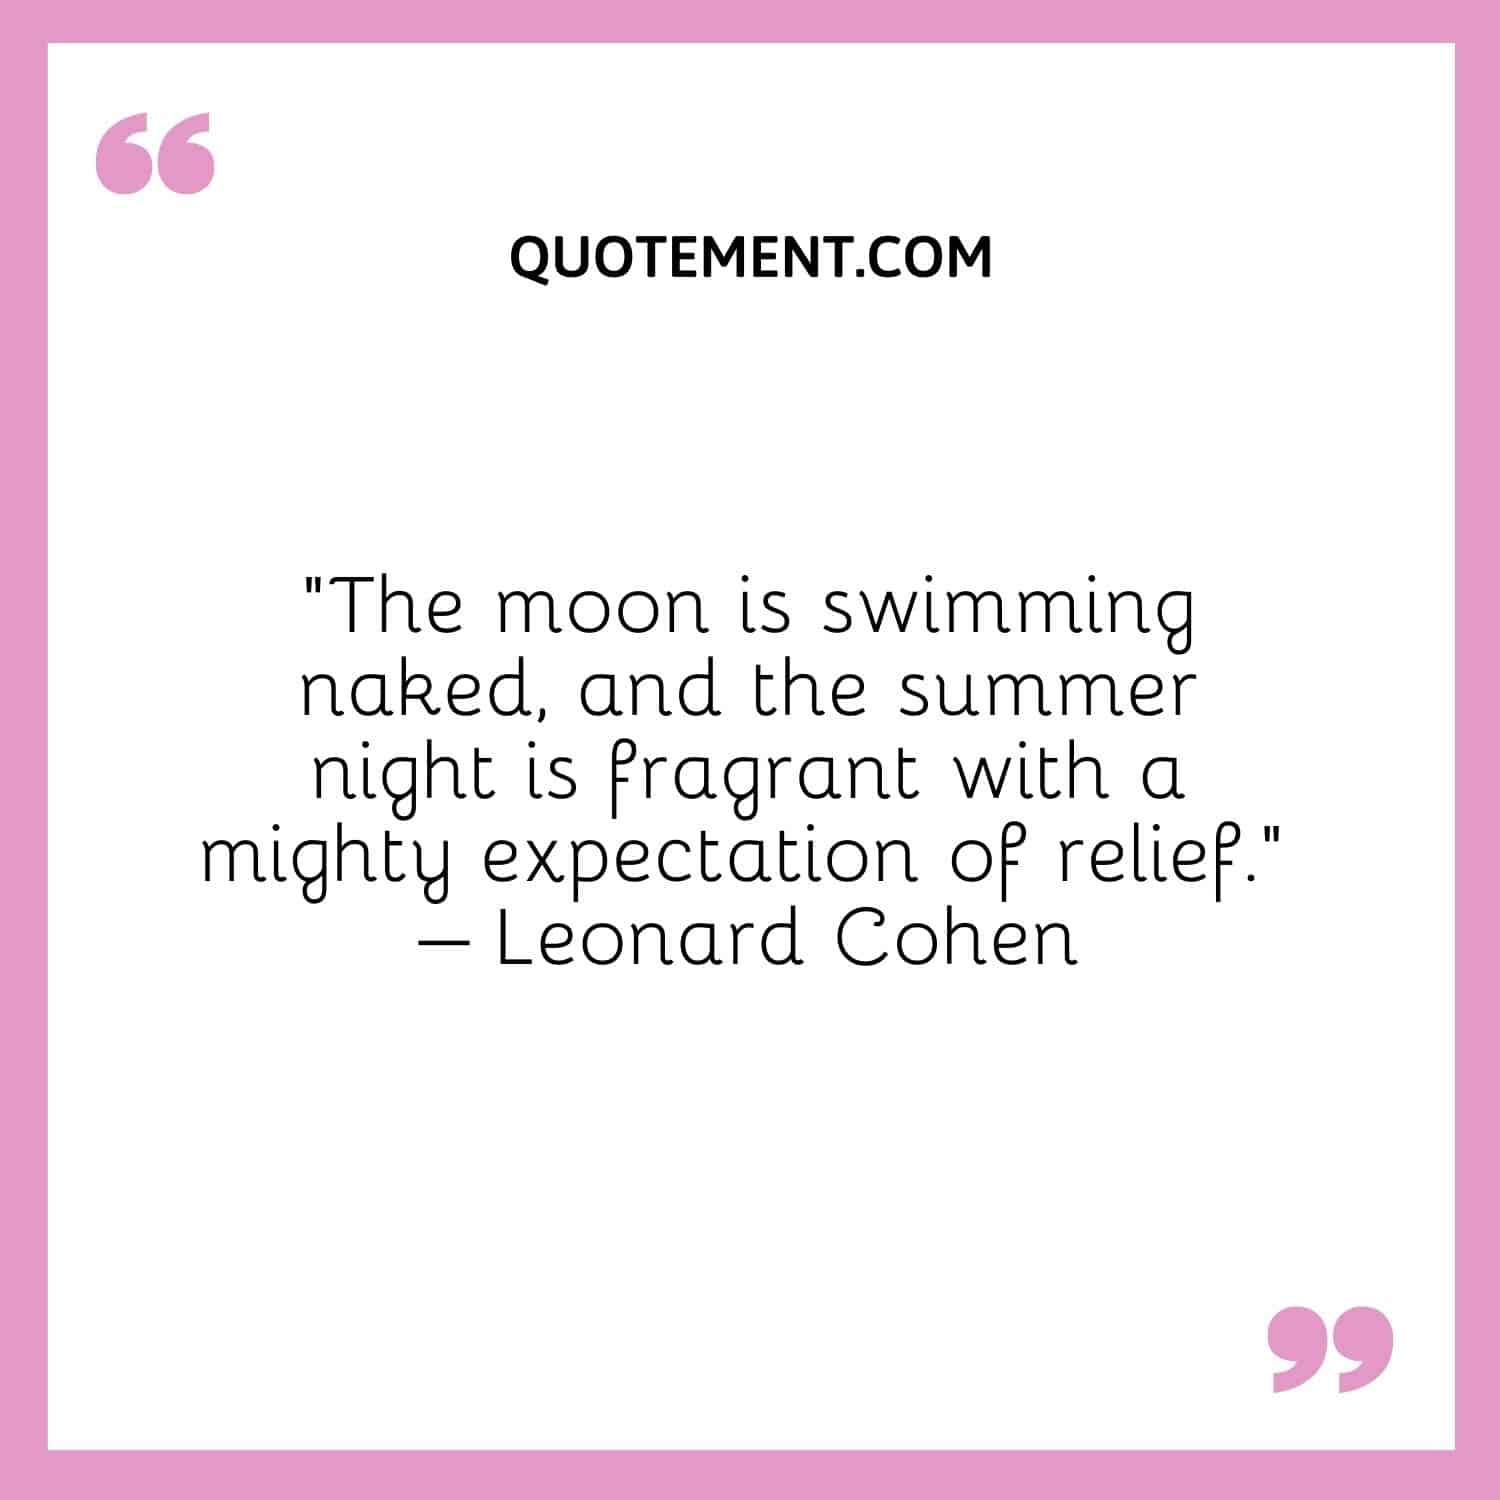 The moon is swimming naked, and the summer night is fragrant with a mighty expectation of relief. – Leonard Cohen